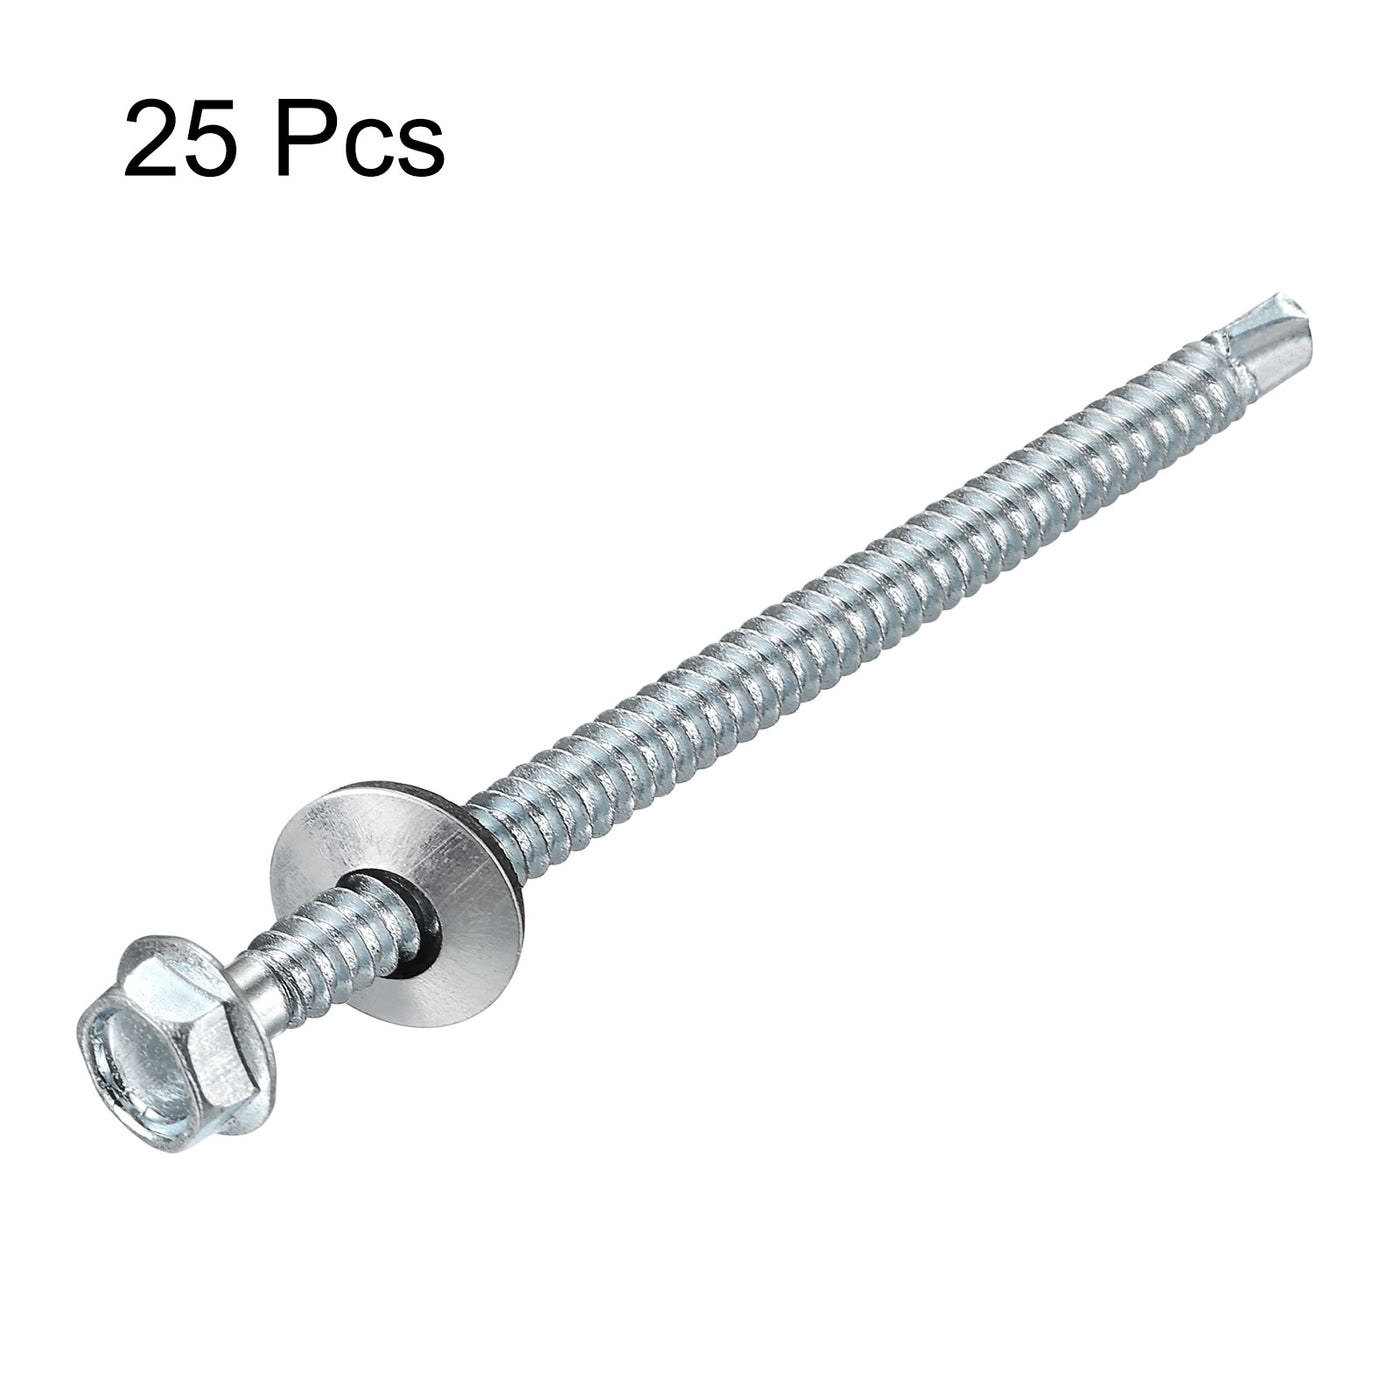 uxcell Uxcell #14 x 4" Self Drilling Screws, 25pcs Roofing Screws with EPDM Washer